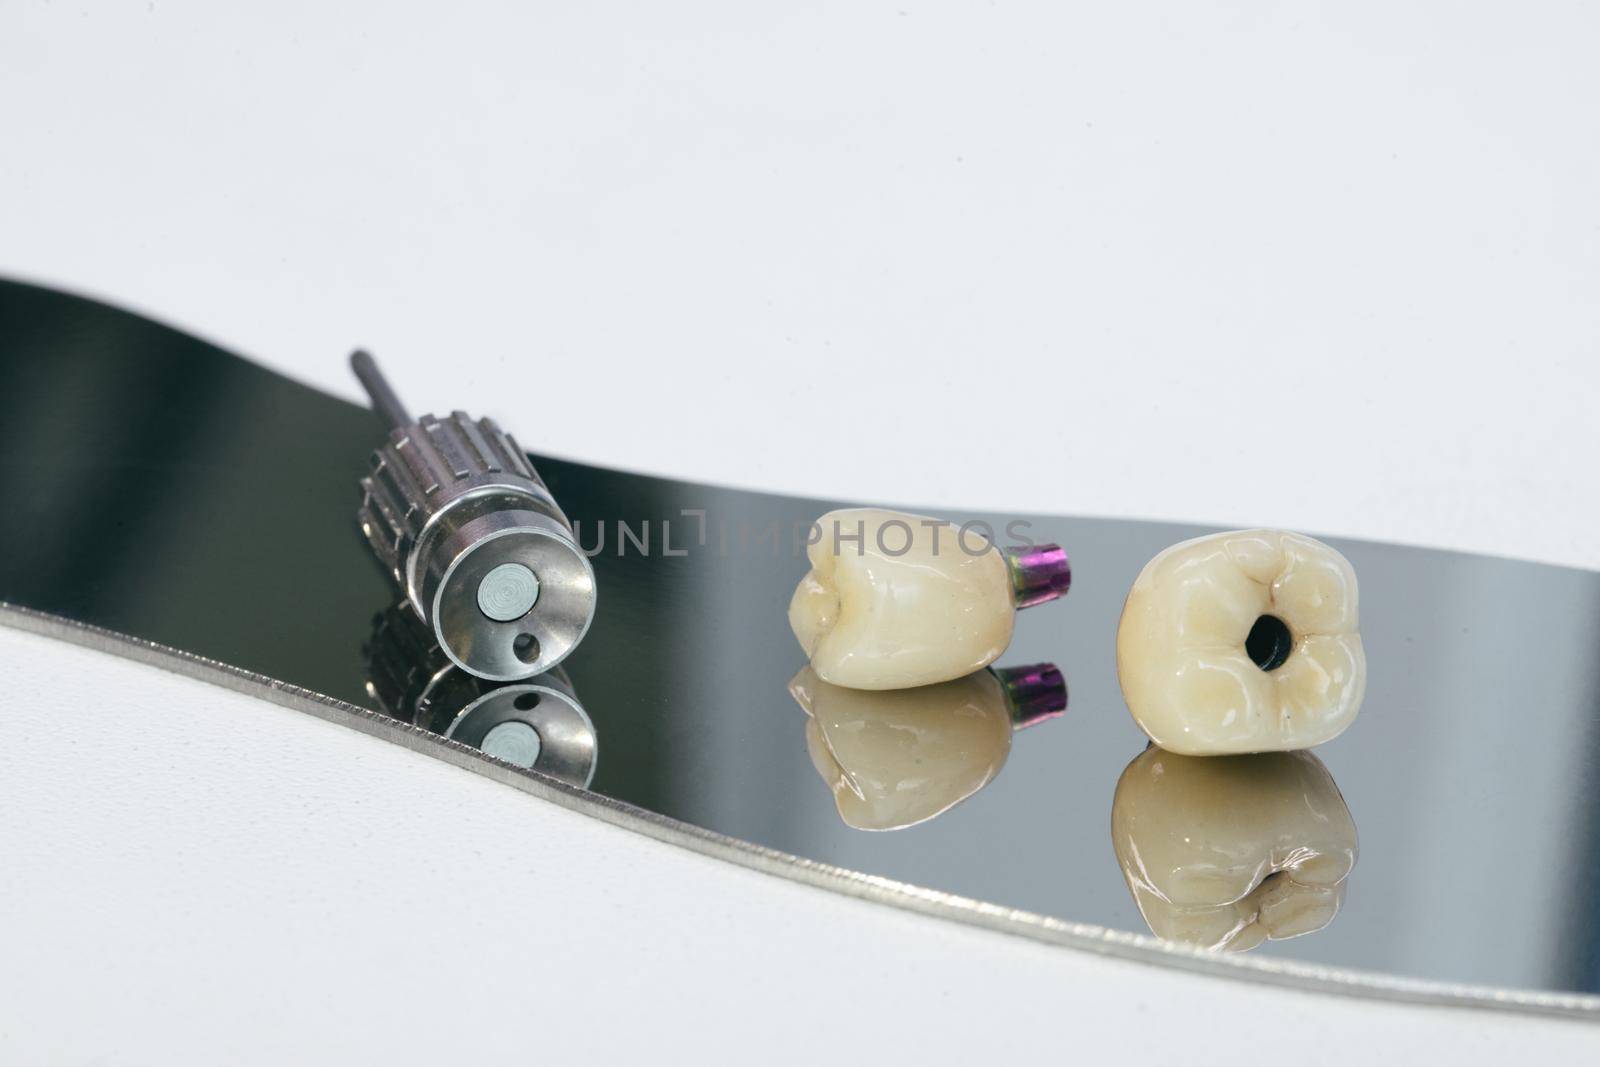 Monolithic screw retained zirconium crown on the implant, a screw and a manual key for screwing the crown. Zirconium crown and zirconium hybrid abutment